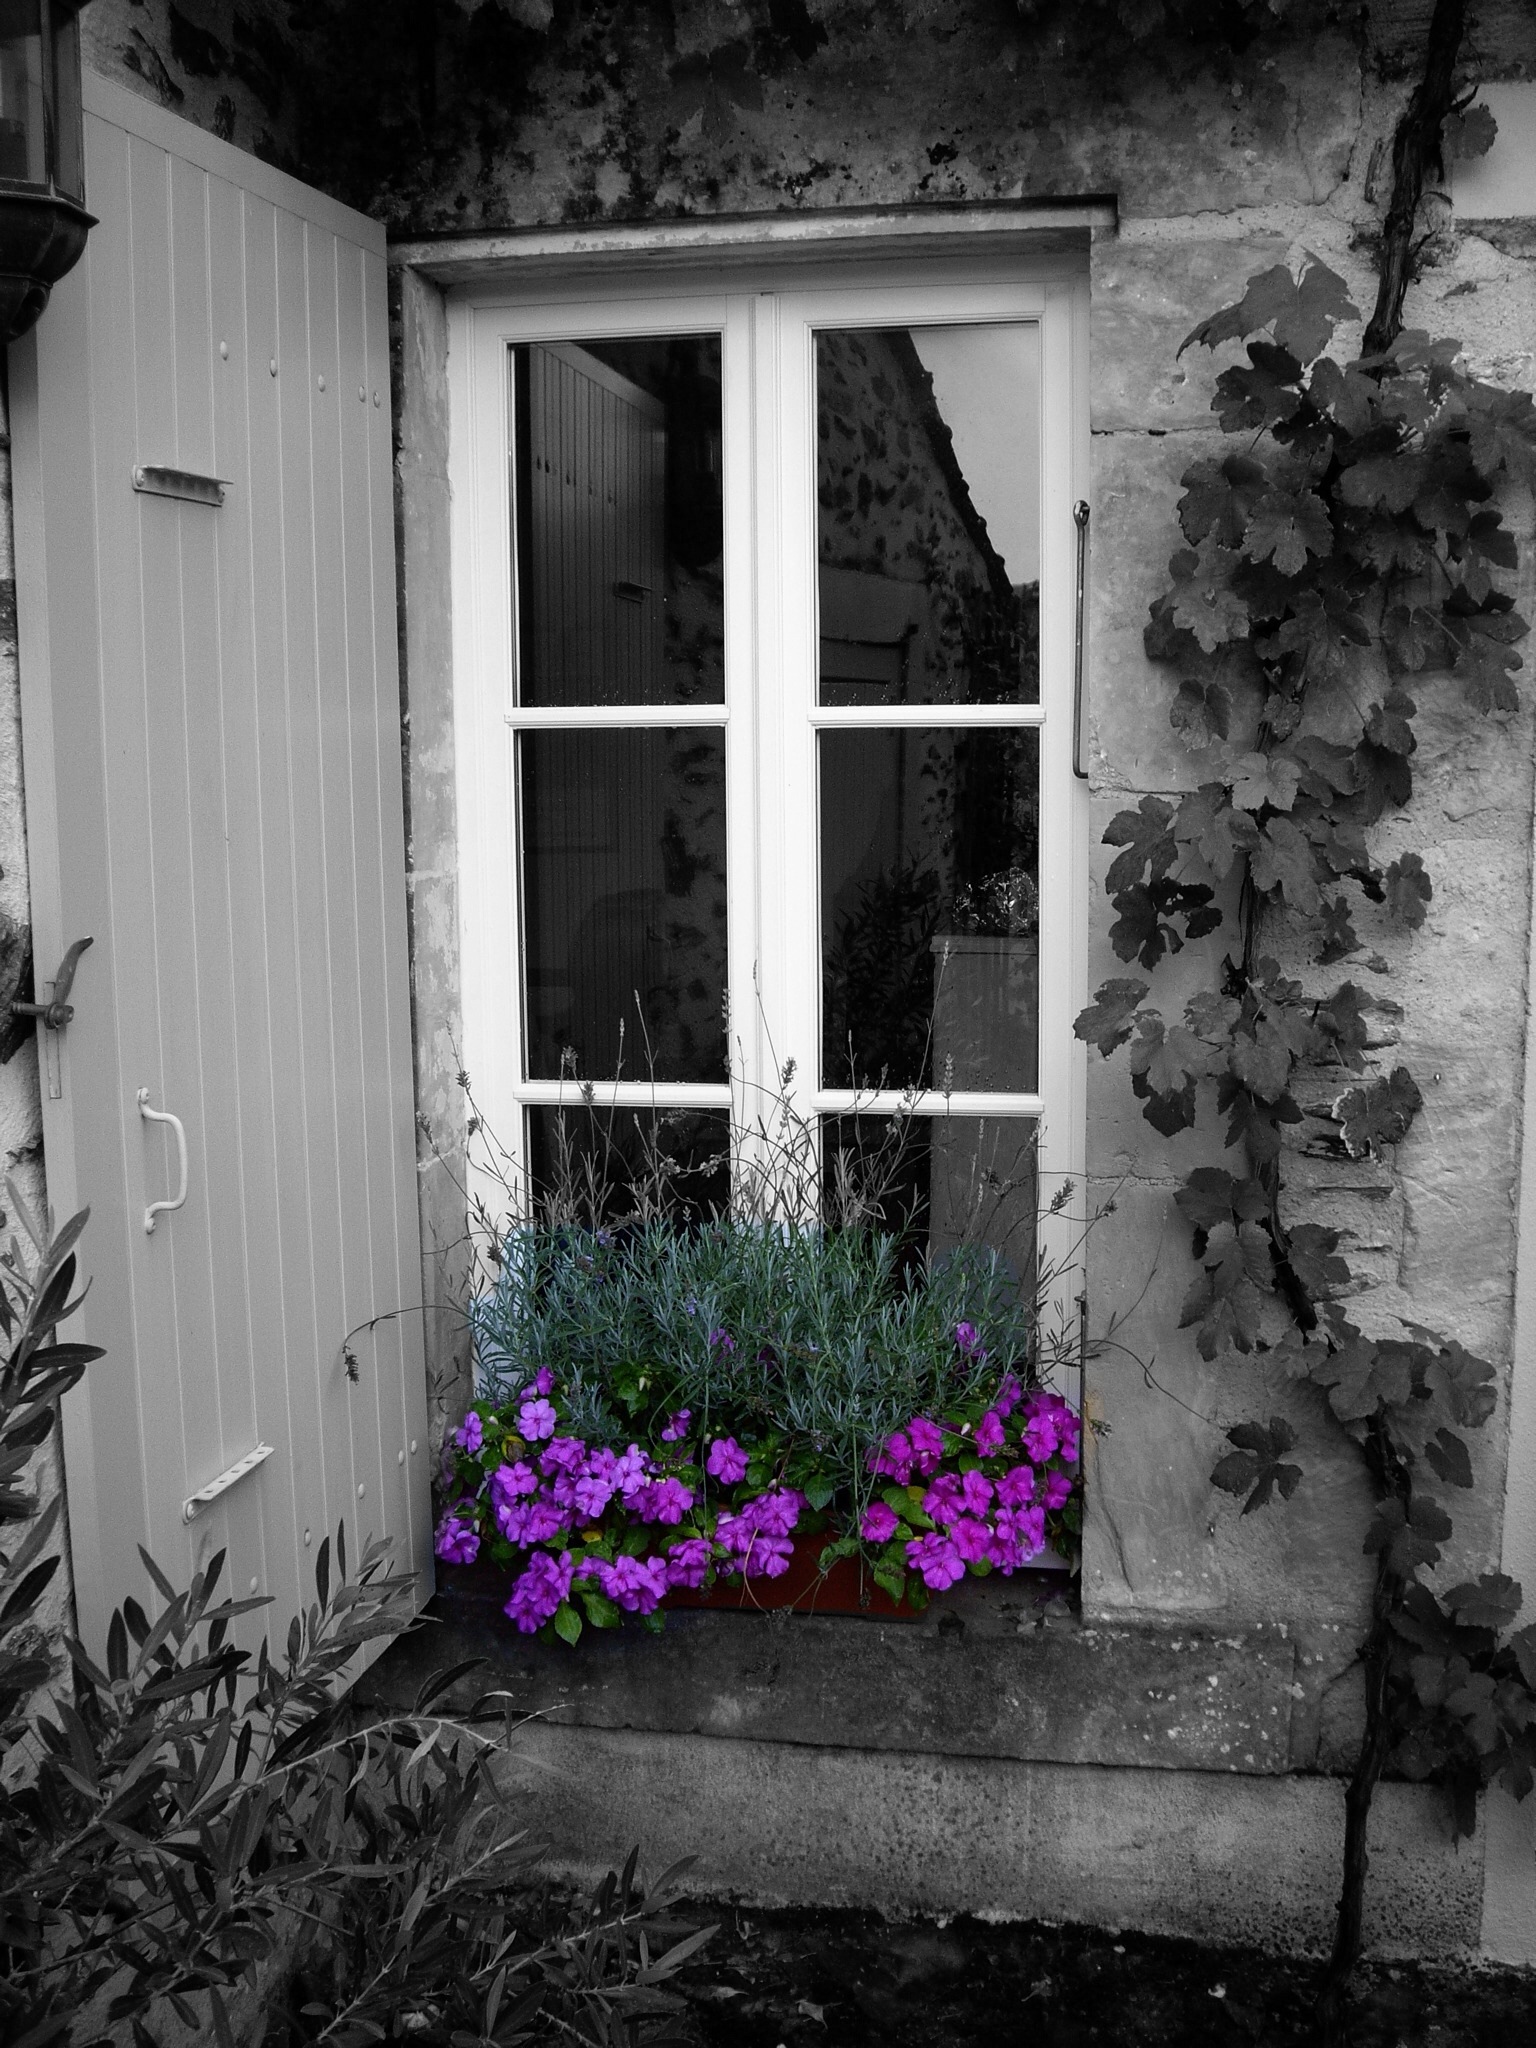 A colour splash of the window of our Gite in central France